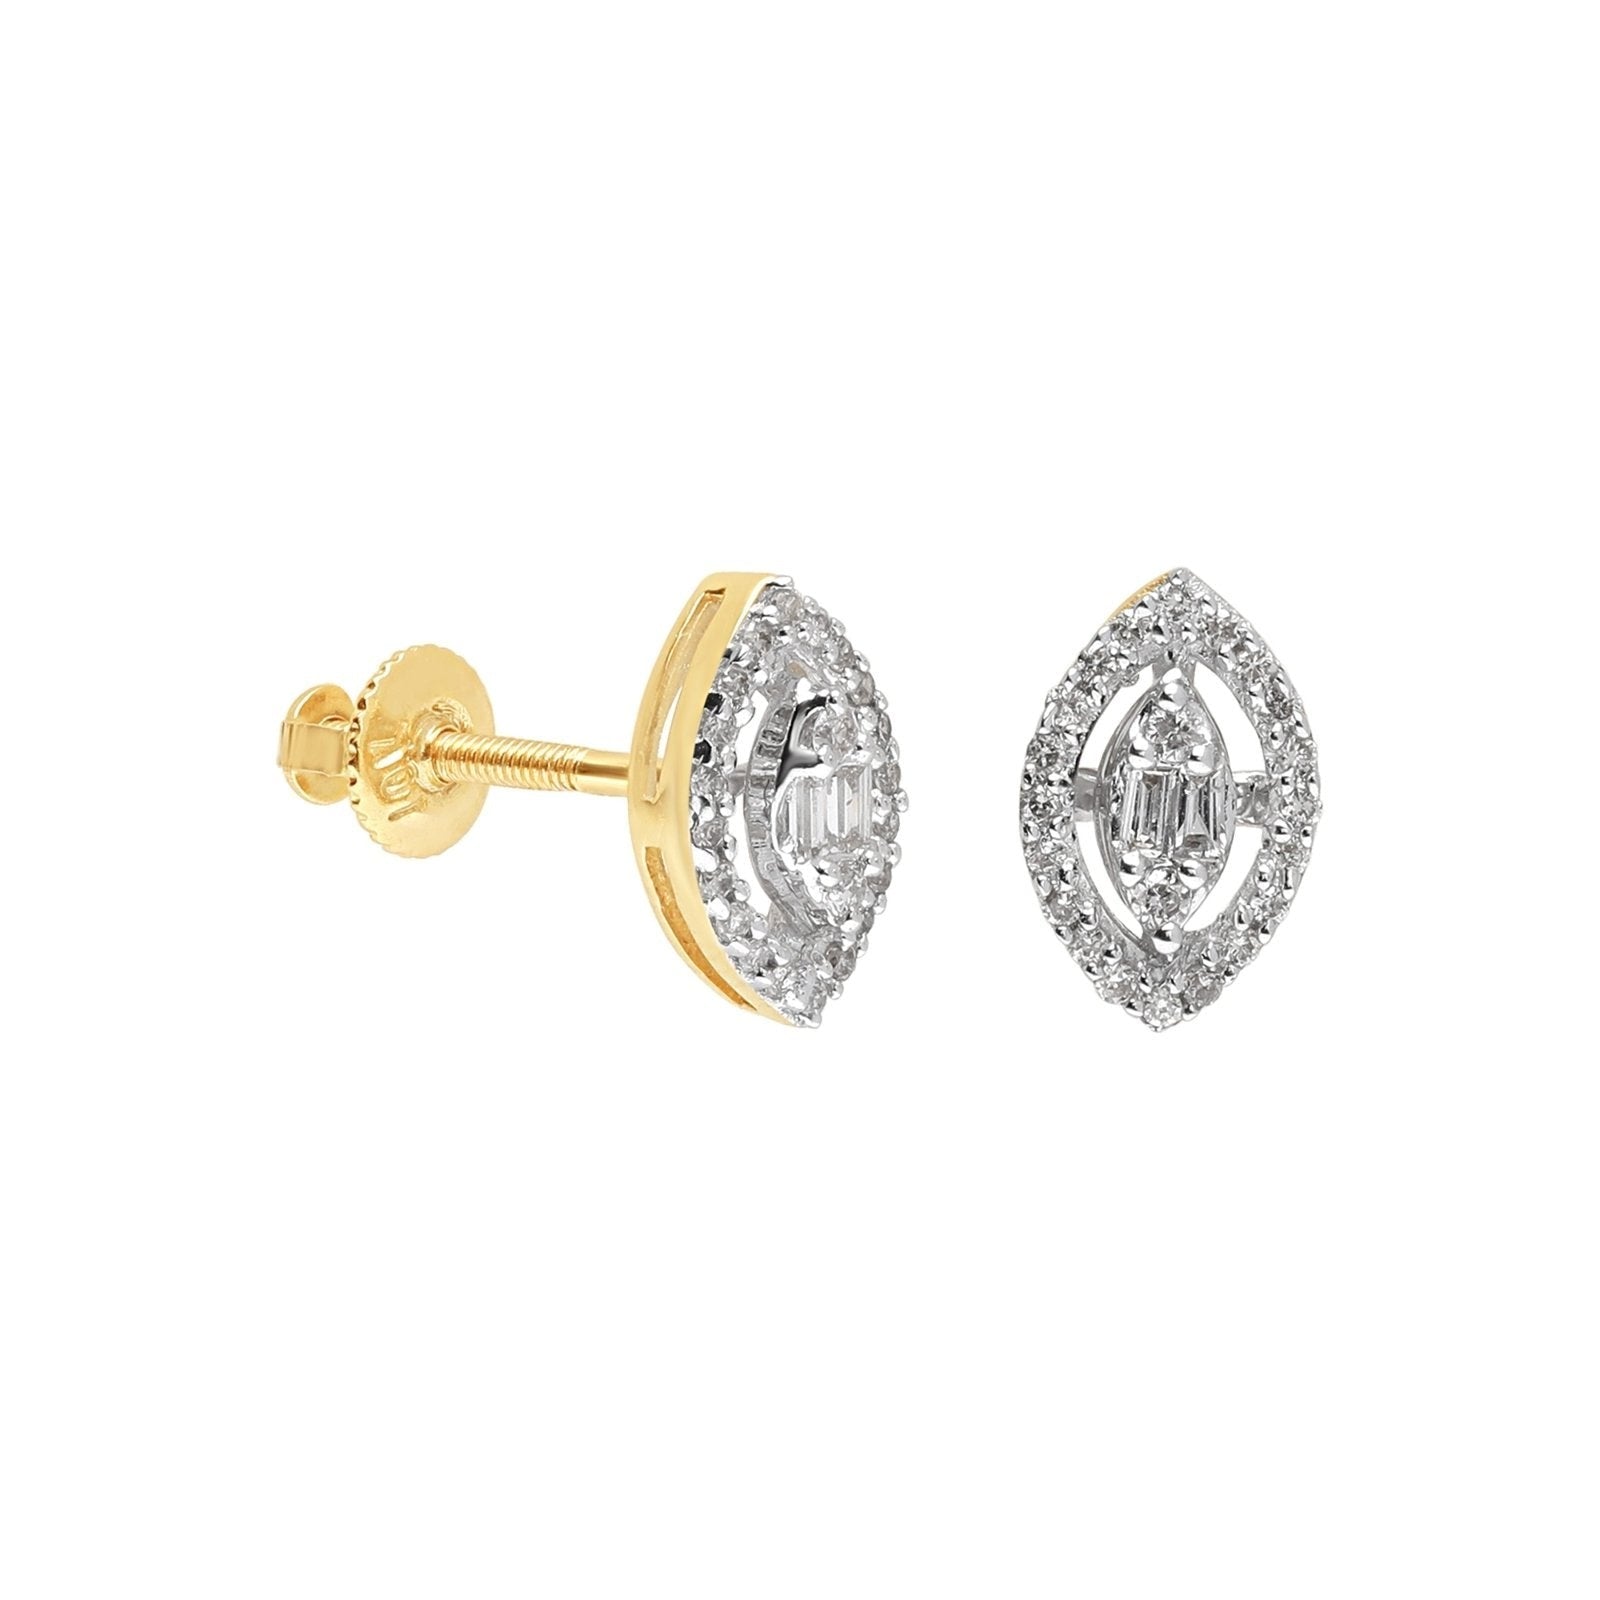 Diamond Pavé Marquise with Halo Screw Back Earrings Earrings Estella Collection #product_description# 14k Birthstone Birthstone Earrings #tag4# #tag5# #tag6# #tag7# #tag8# #tag9# #tag10#